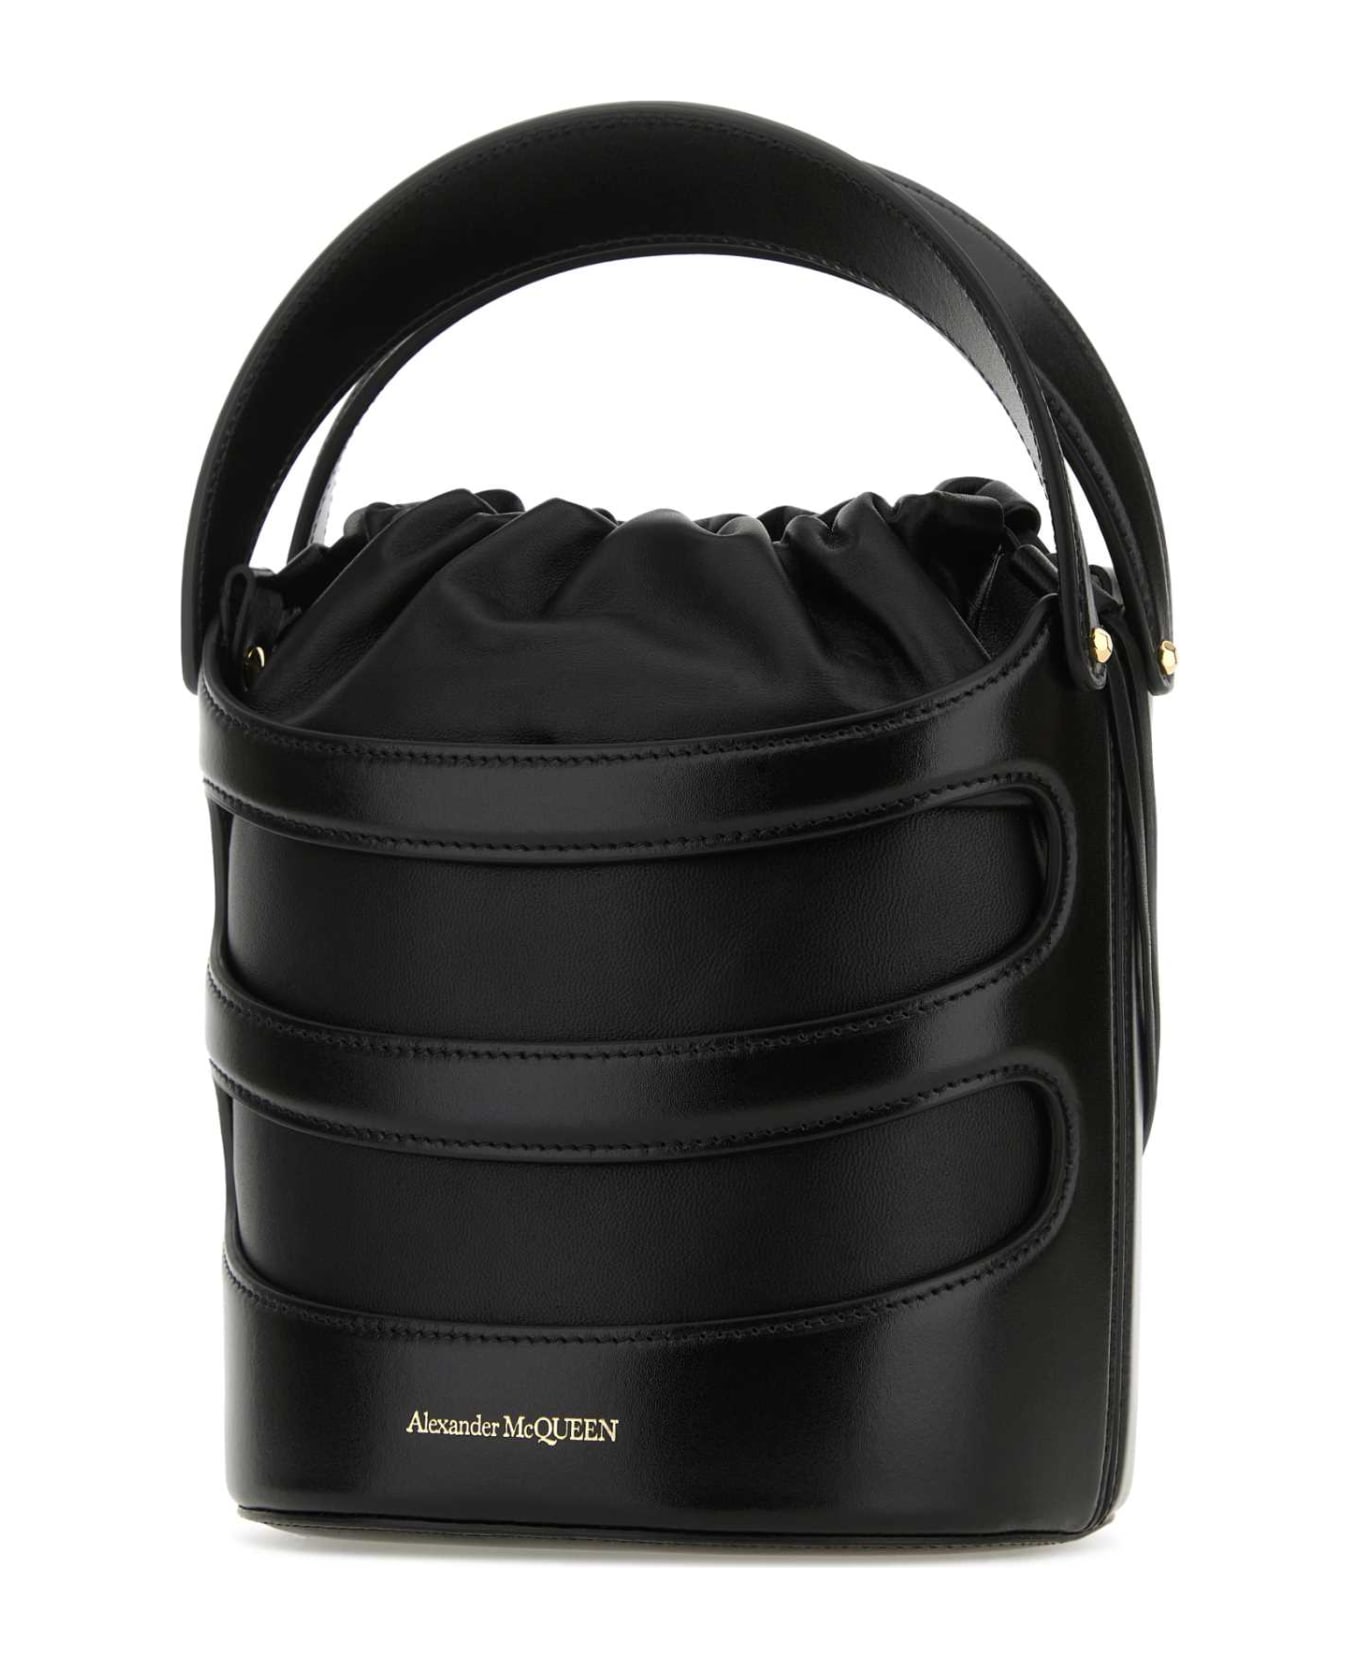 Alexander McQueen Black Leather The Rise Bucket Bag - NEROBIANCO